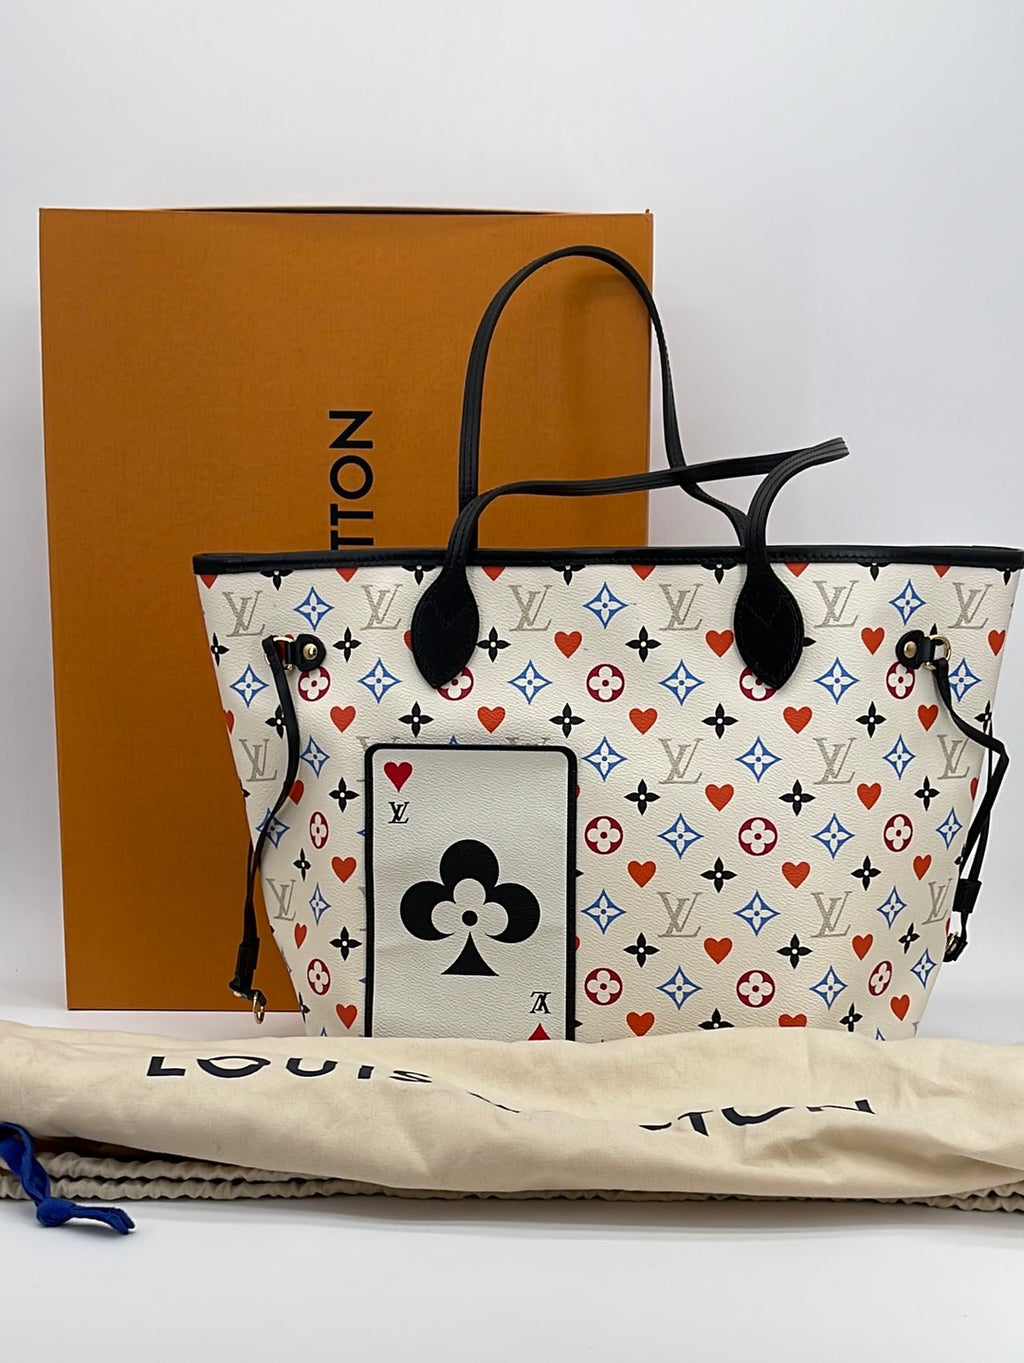 GIFTABLE Preloved Louis Vuitton White Multicolor Monogram Neverfull MM "Game On" Tote Bag CA4290 090623 $200 OFF